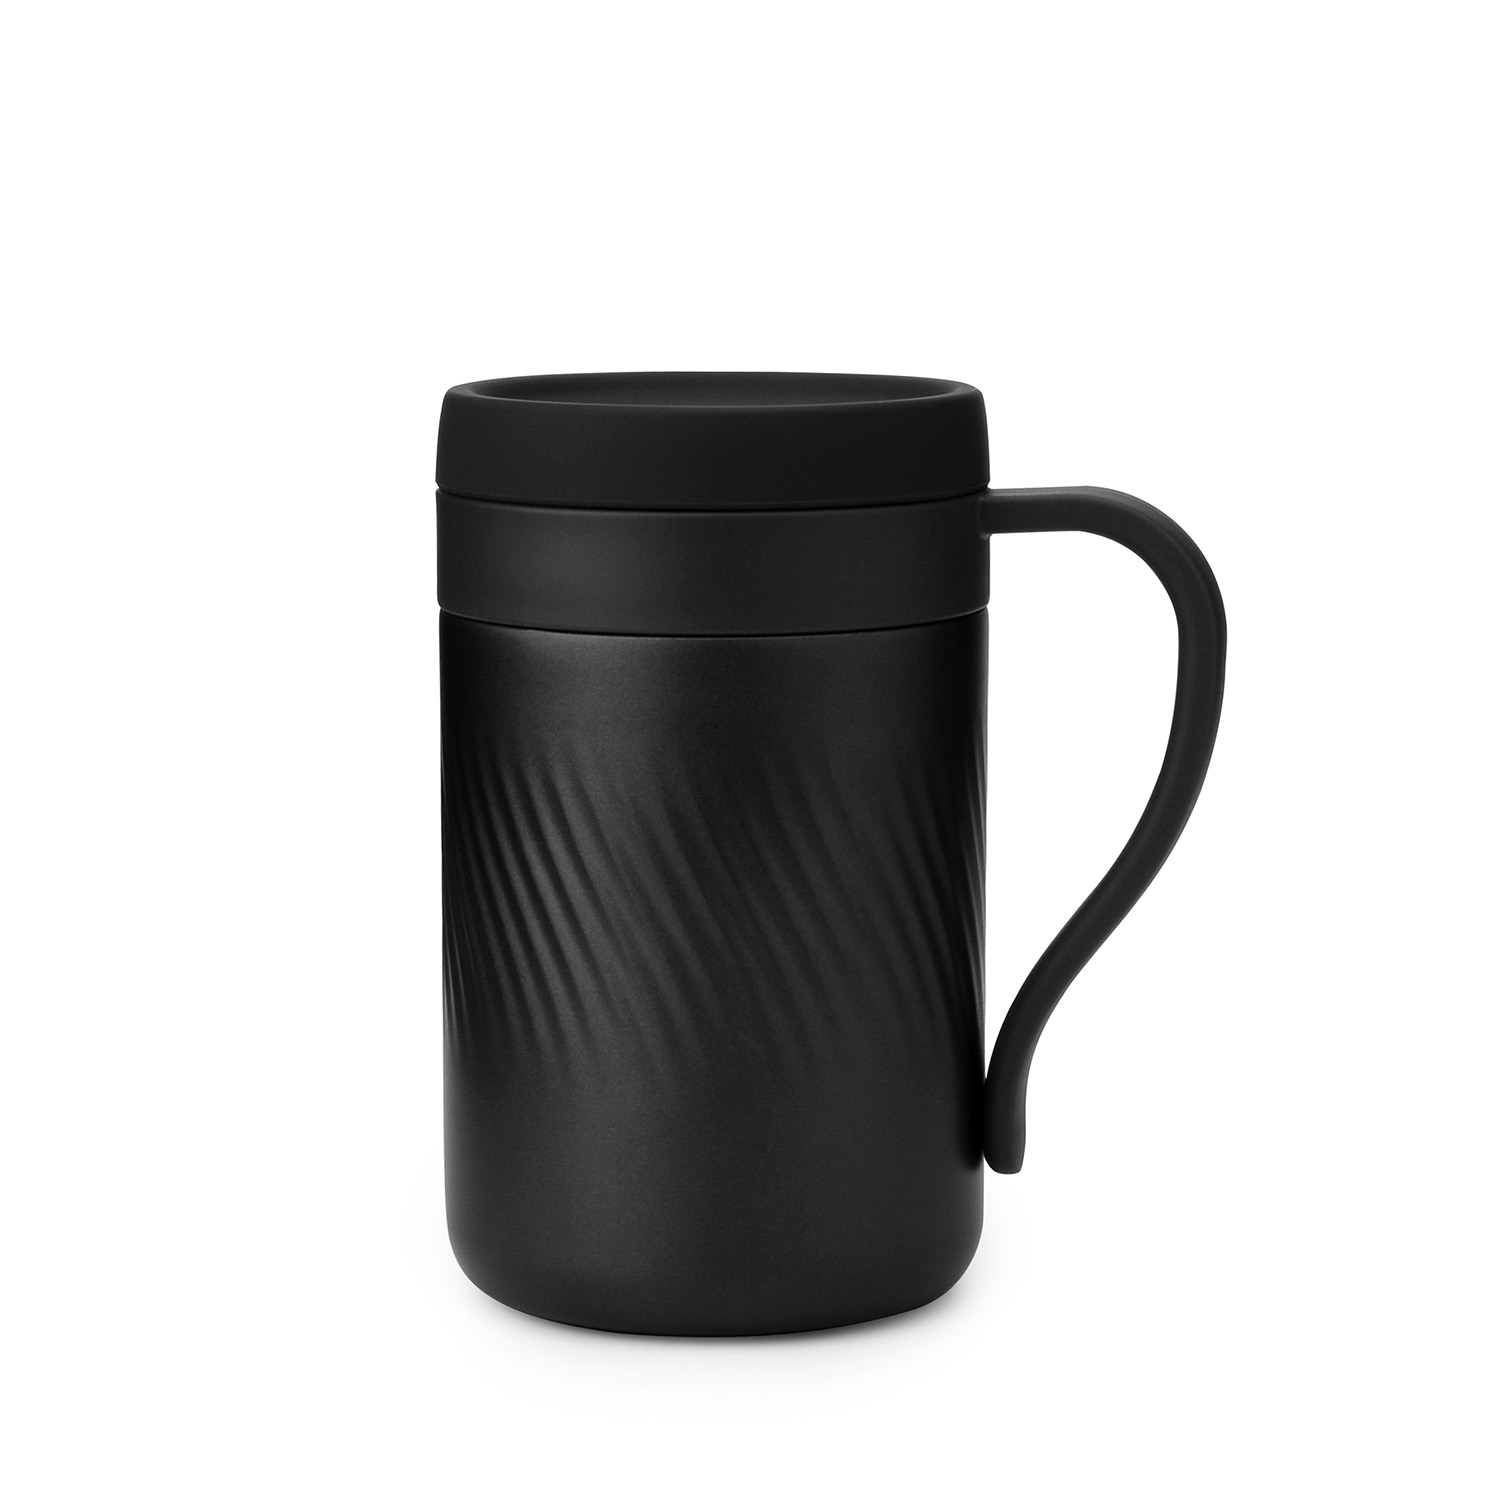 https://www.waterbottle.tech/wp-content/uploads/2019/10/tumbler-mug-with-handle-and-silcone-lid-s22450f1-1.jpg